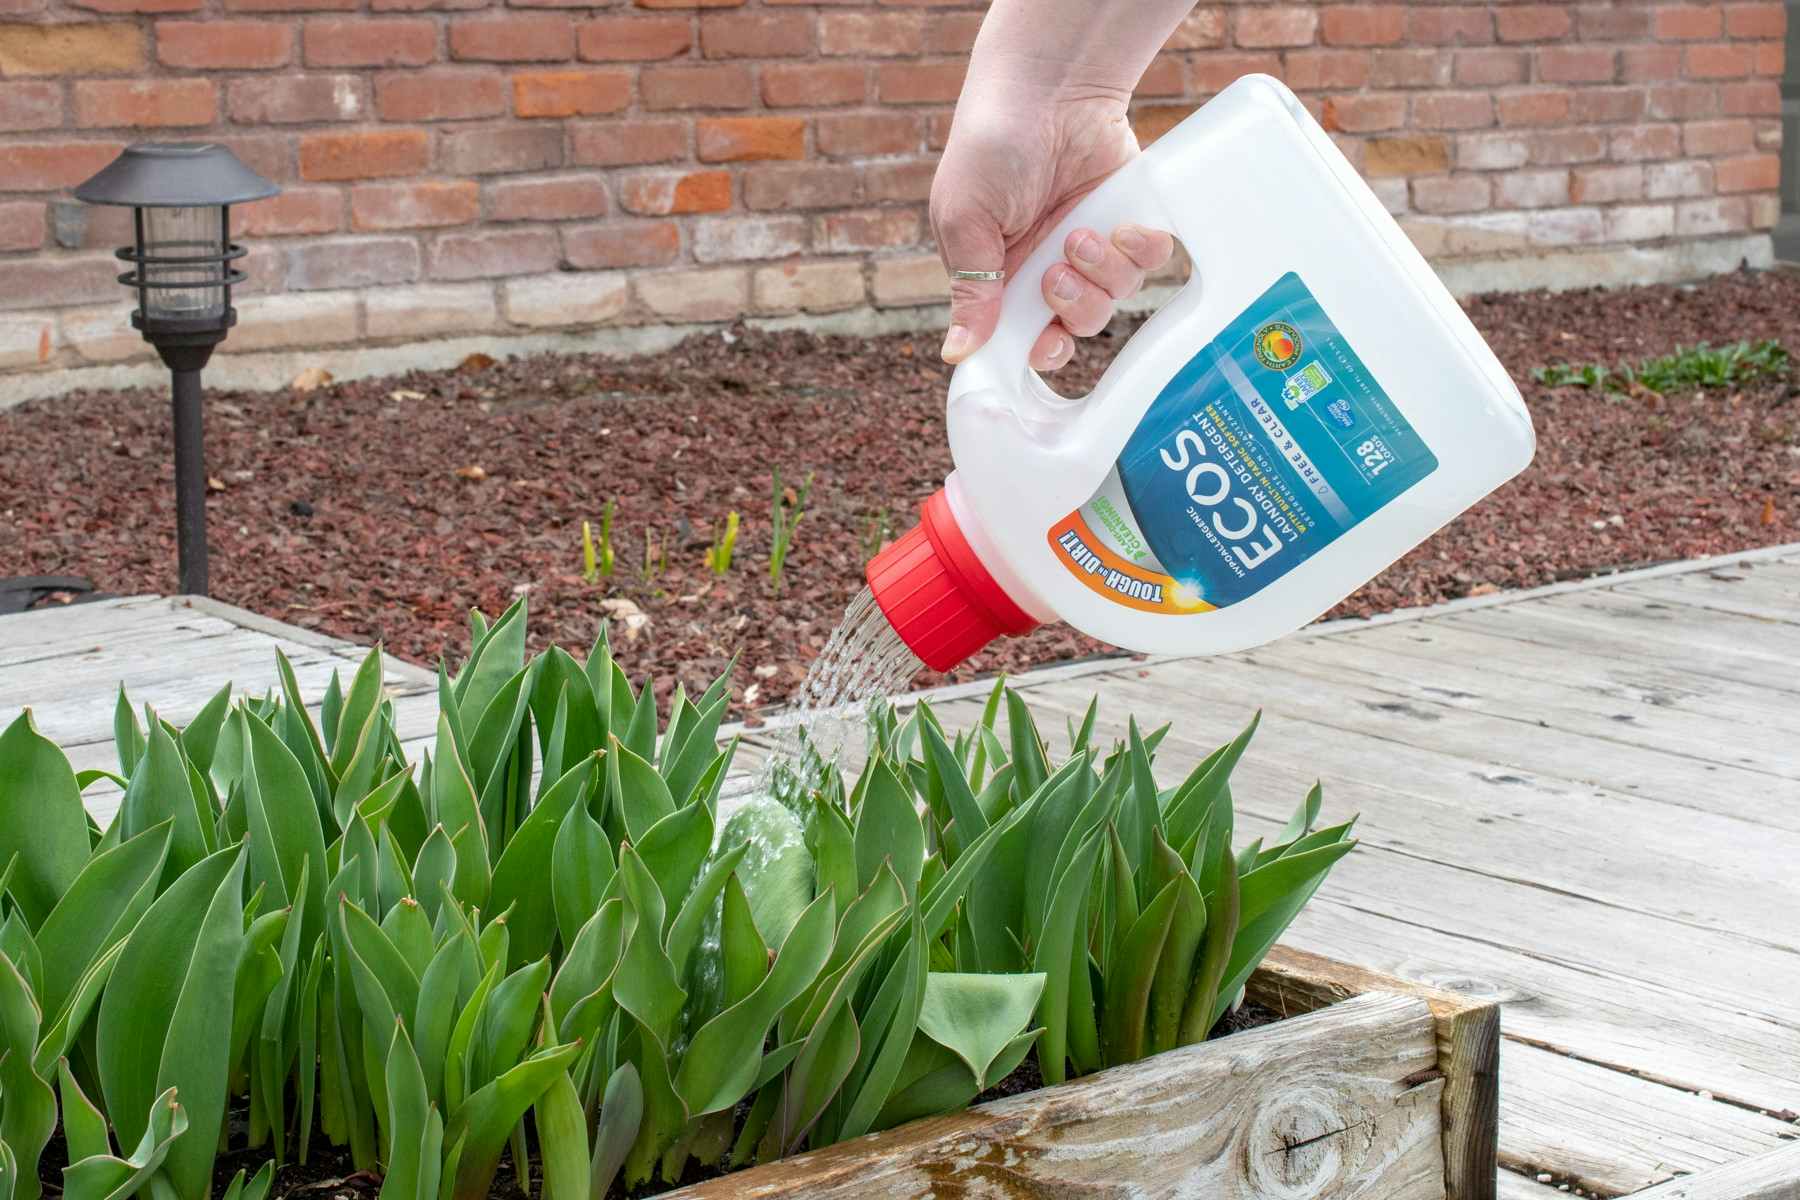 Reuse a laundry detergent bottle for a garden watering can